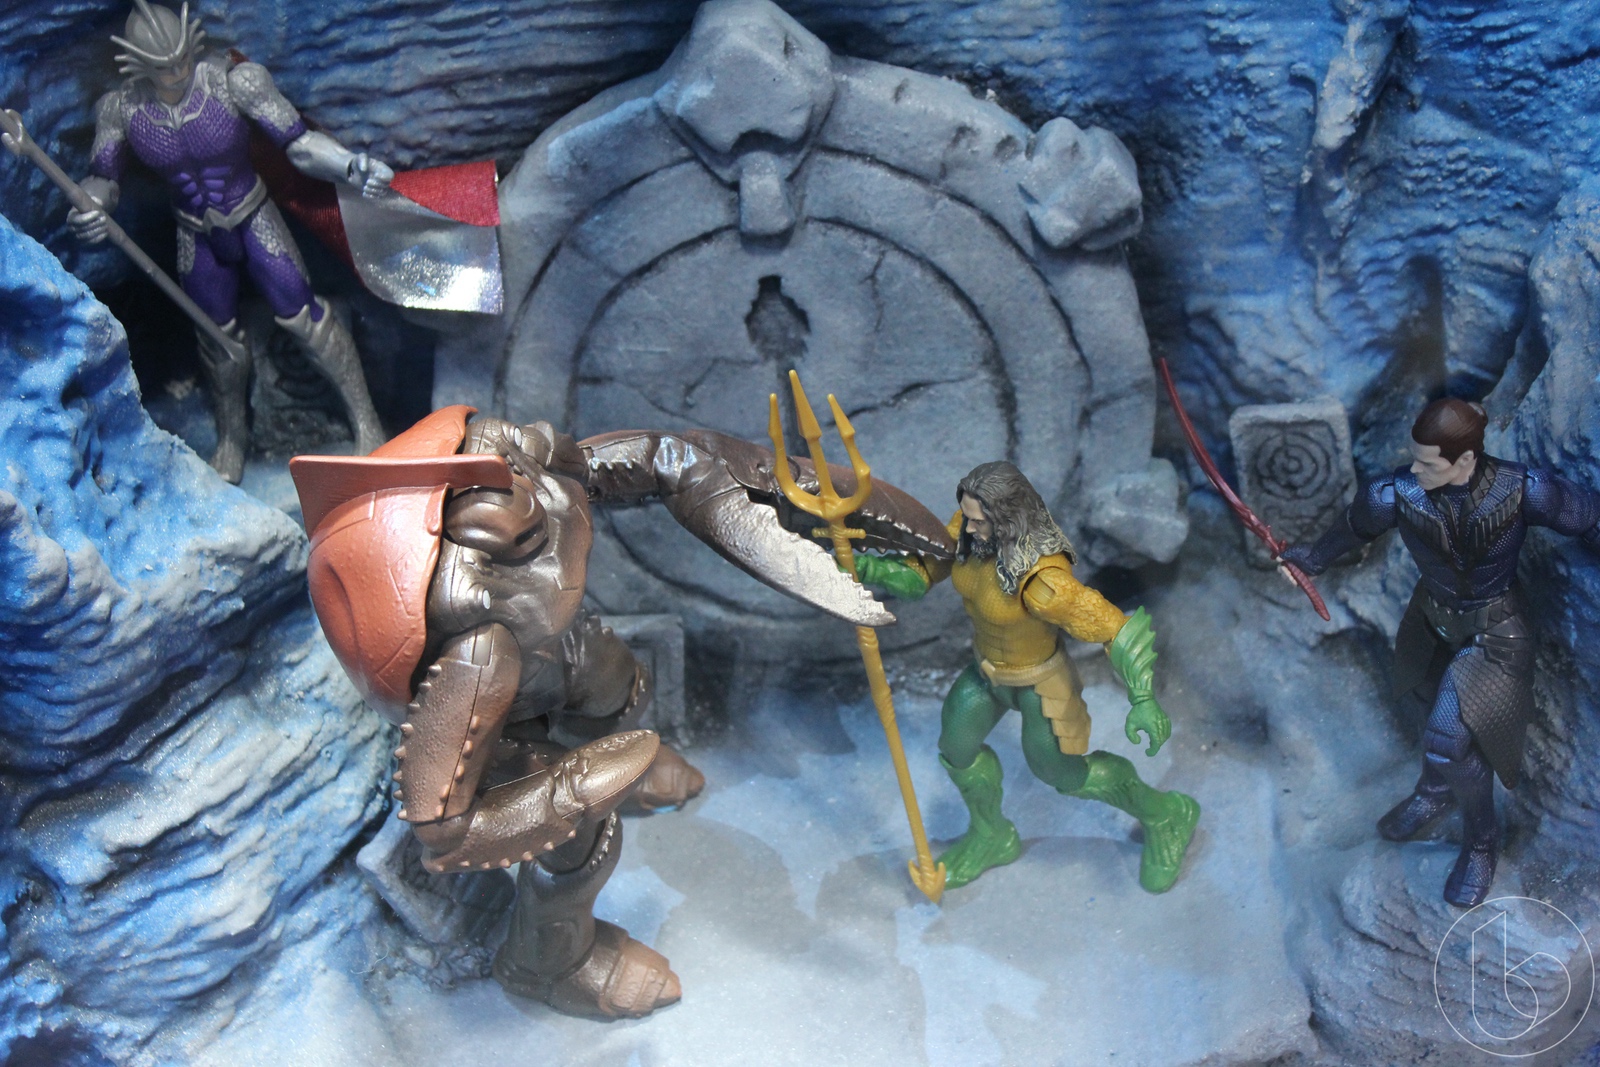 Aquaman Toys at SDCC 2018 - It Was a Water Wonderland 